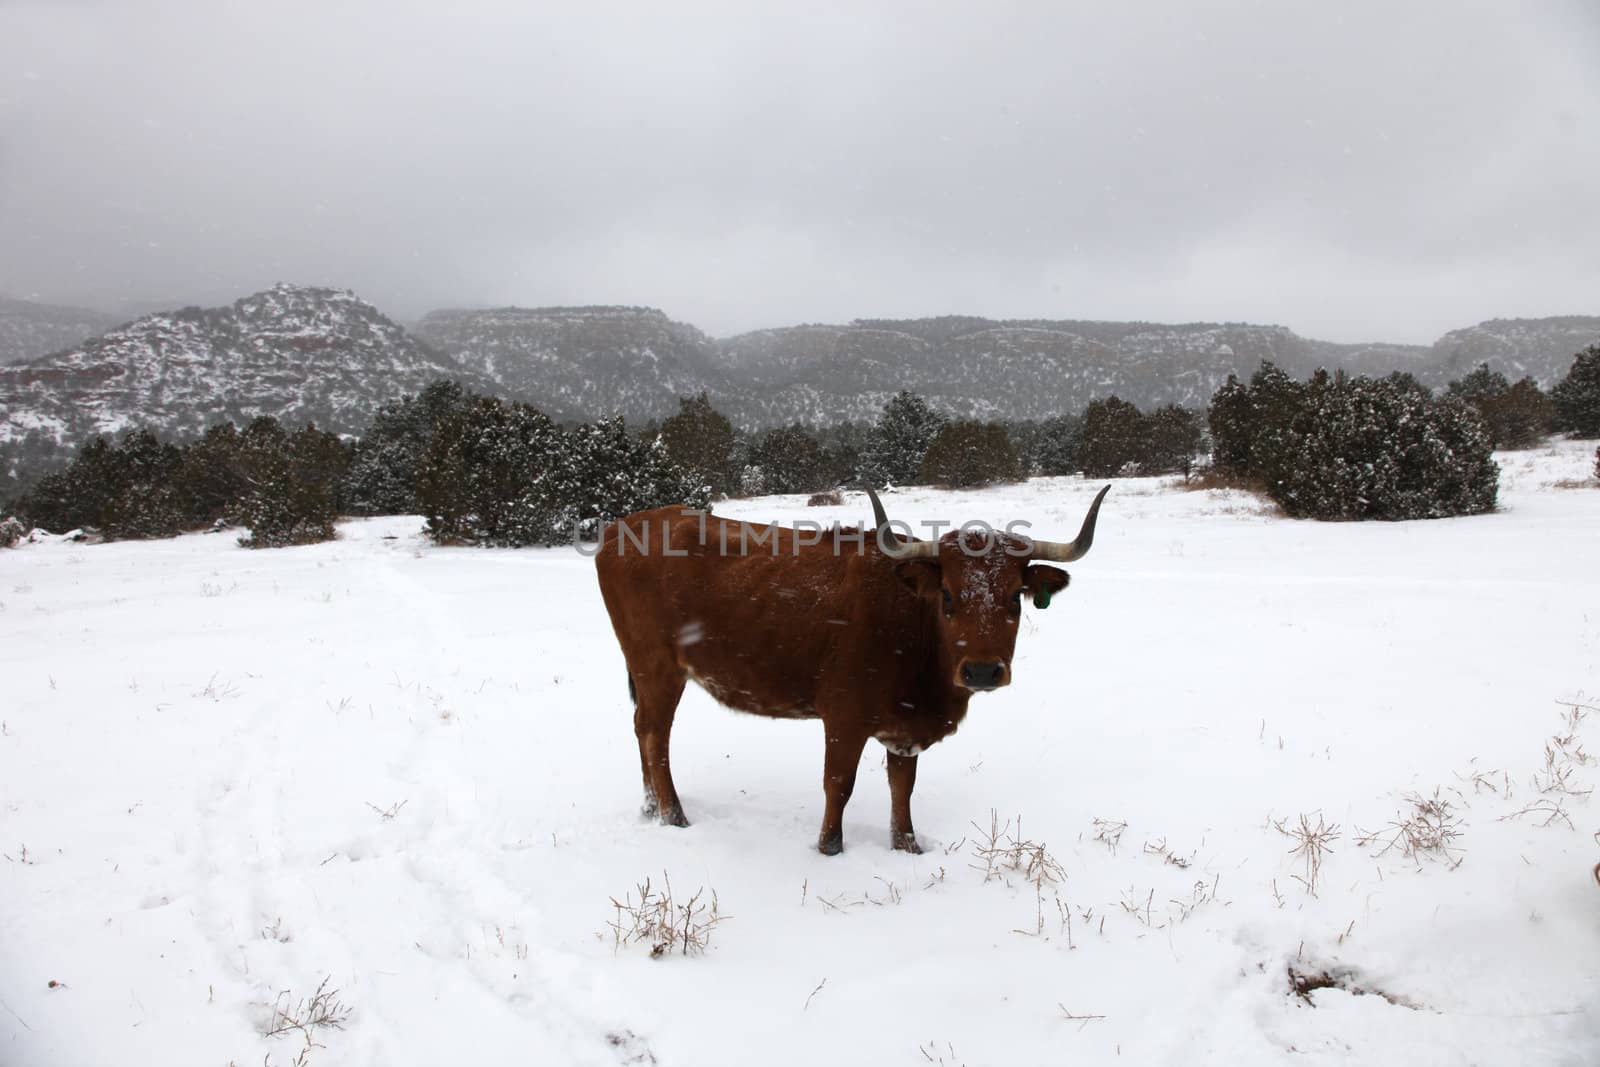 Longhorn cow in Snowstorm by Auldwhispers